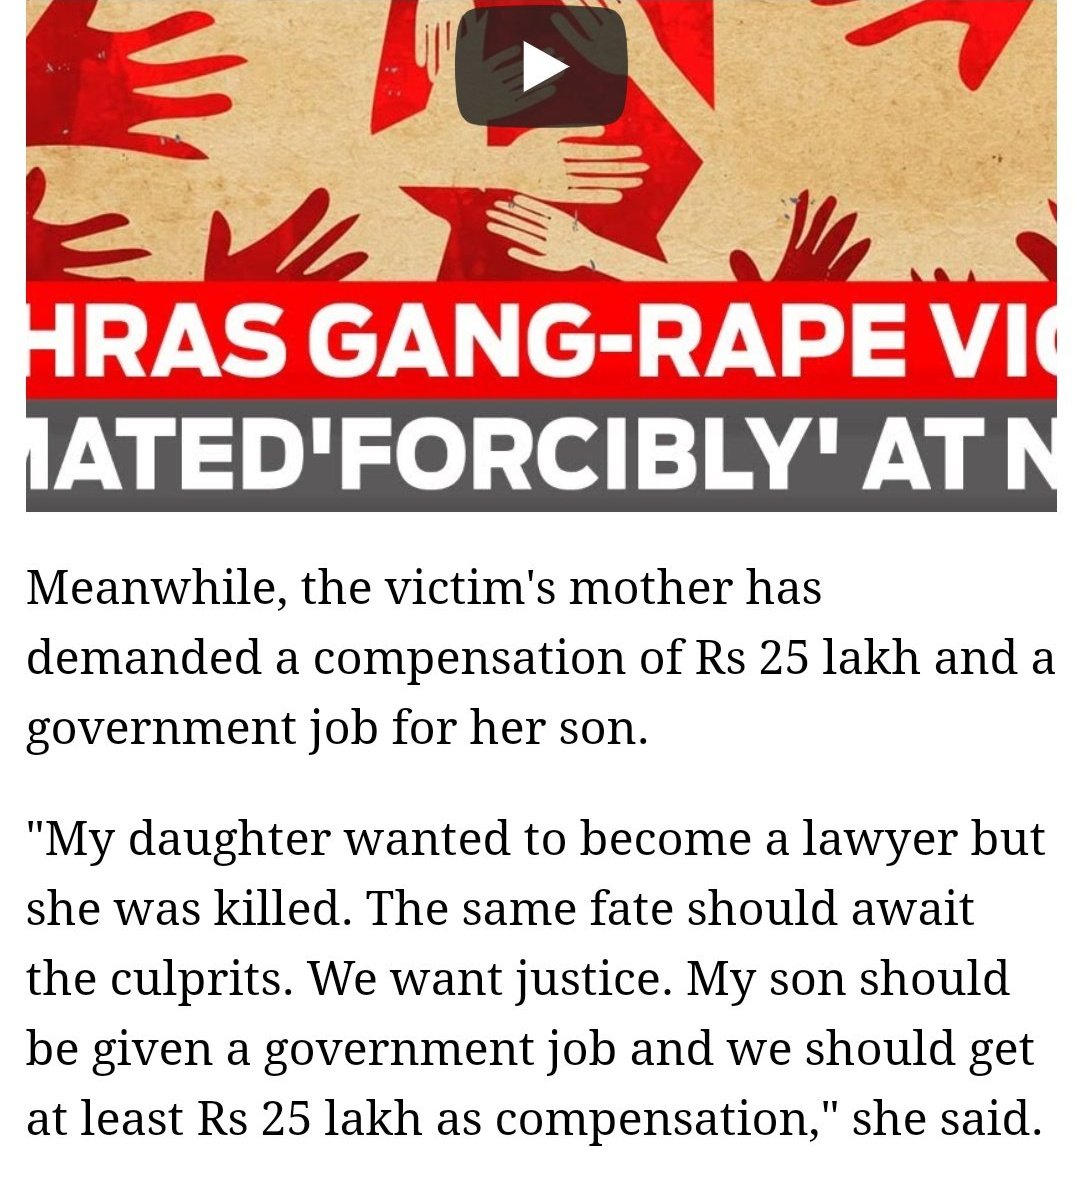 Last but not the least, quite strangely, family immediately came out with their demands of 25Lacs in cash and a government job for their son when it had barely been few hours of death of the girl. Hope real culprit is punished. End.